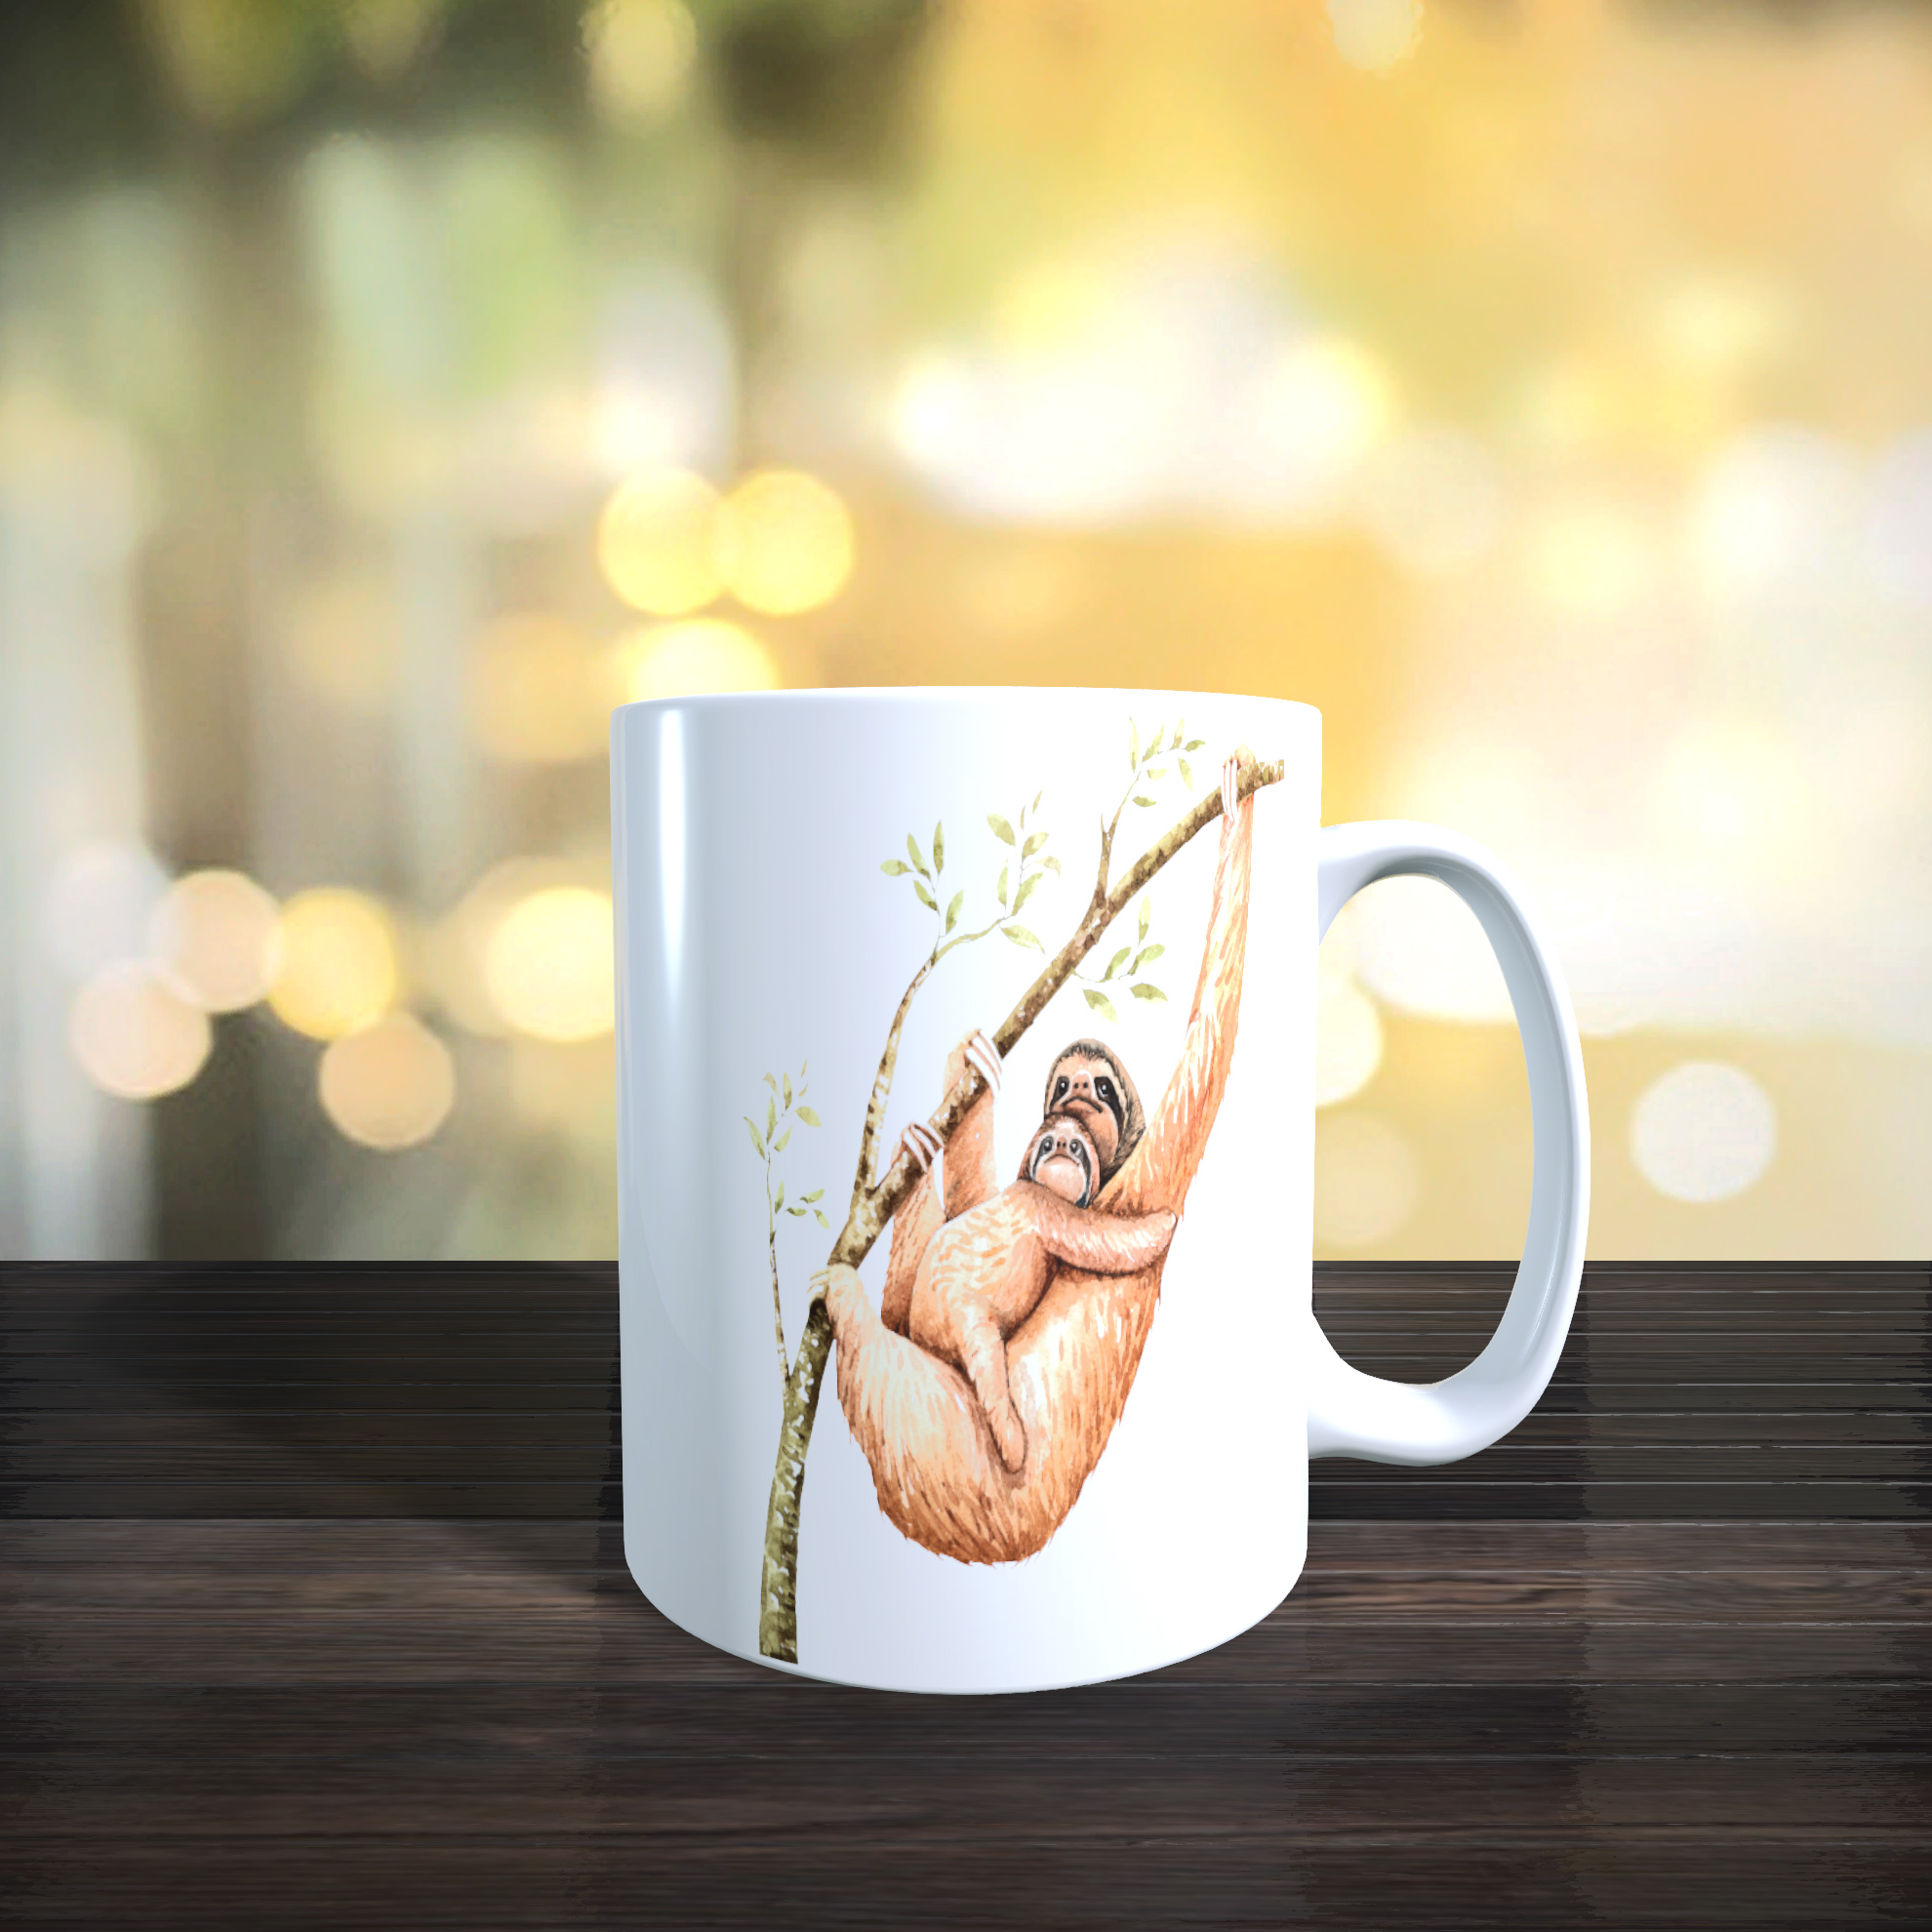 Cute Mother and Baby Sloth 11oz Ceramic Mothers Day / Birthday Gift Mug.